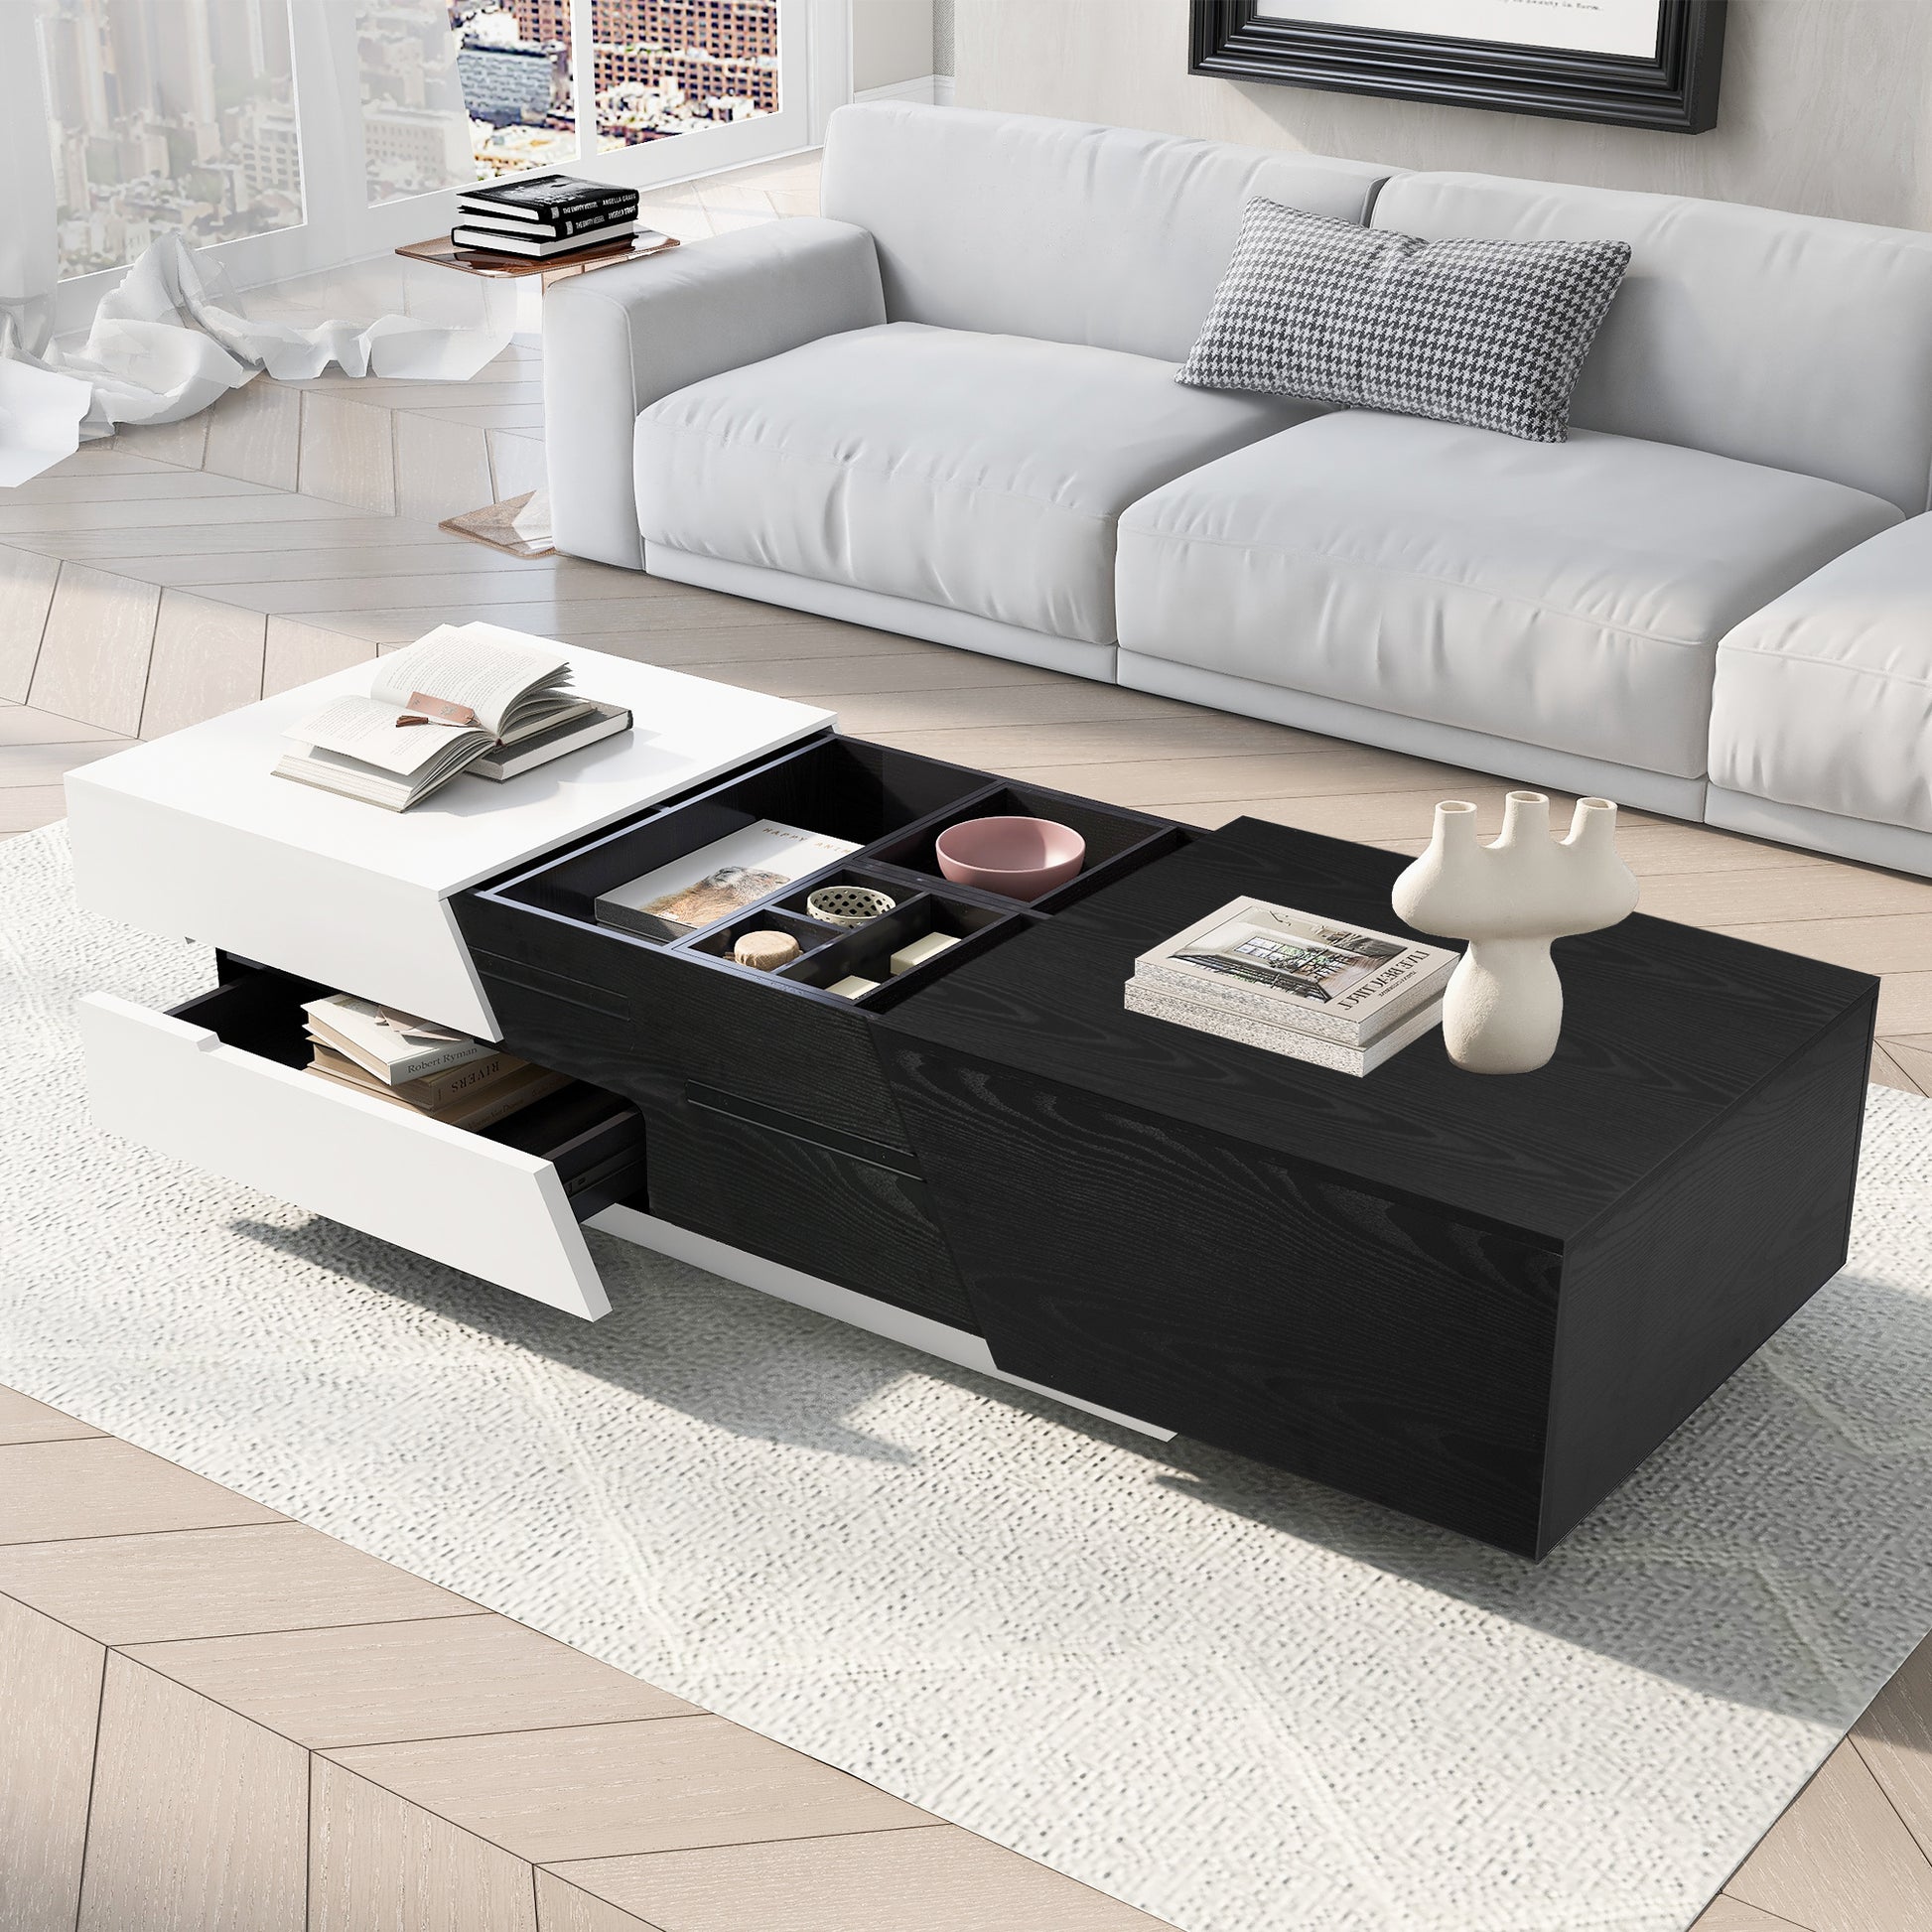 Modern Extendable Sliding Top Coffee Table with Storage in White&Black - Enova Luxe Home Store